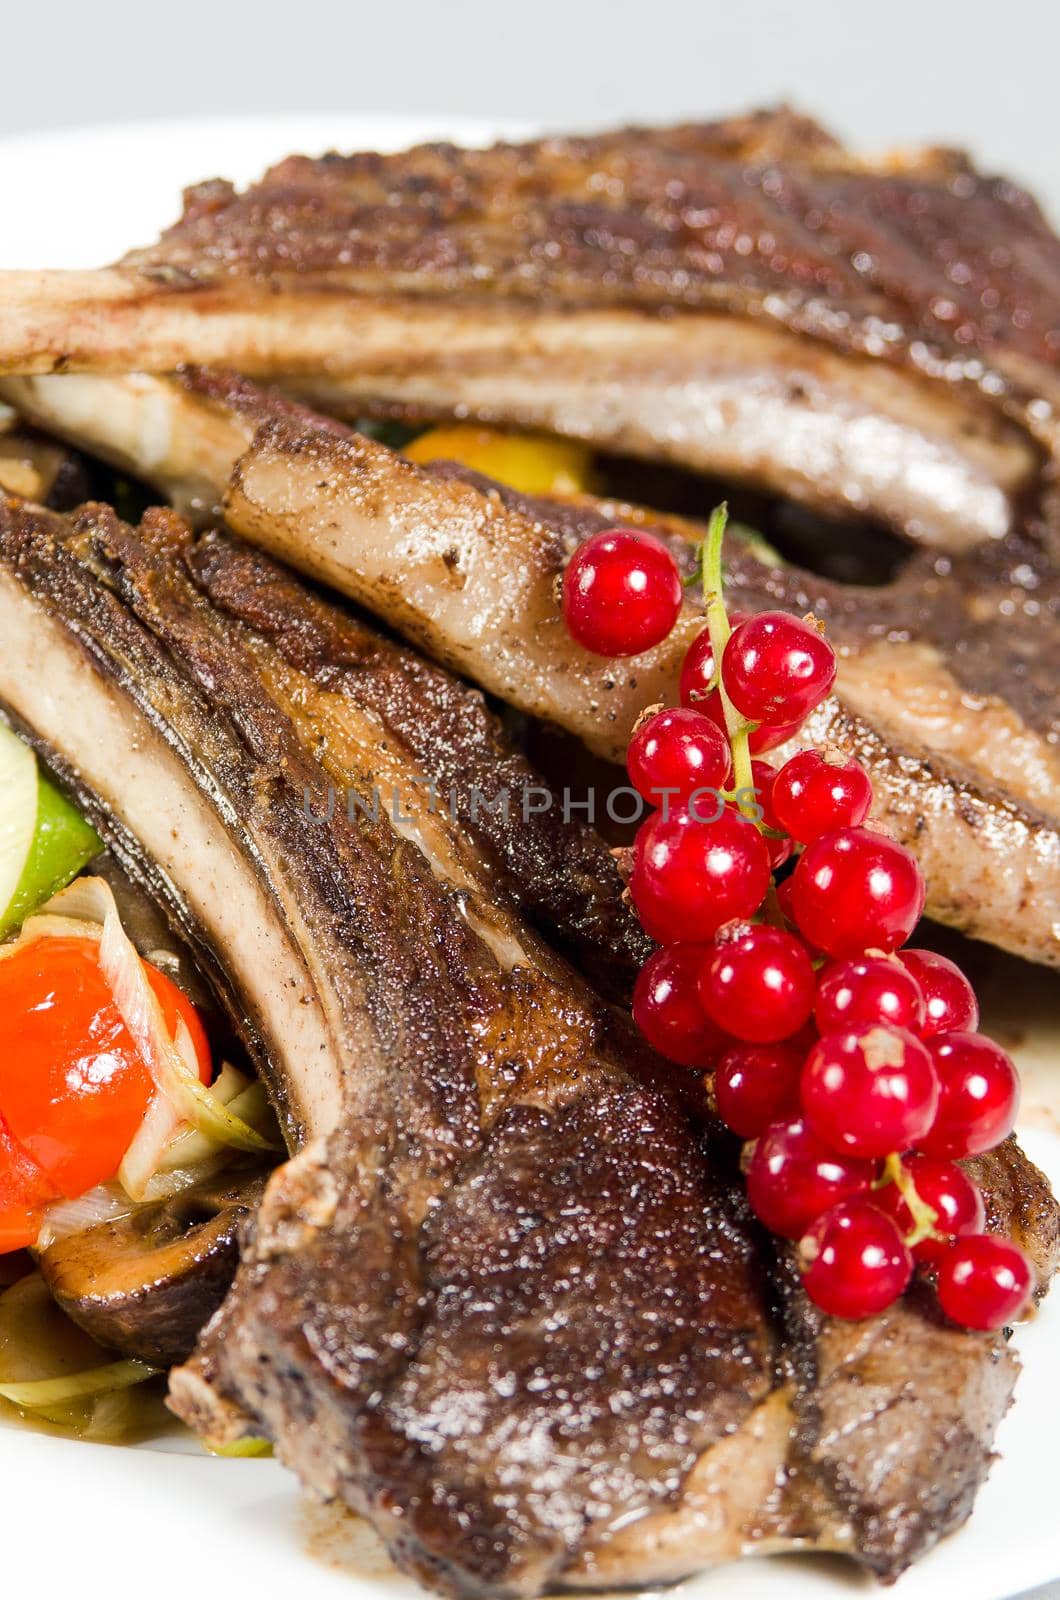 Roasted lamb ribs with red currant and vagetables